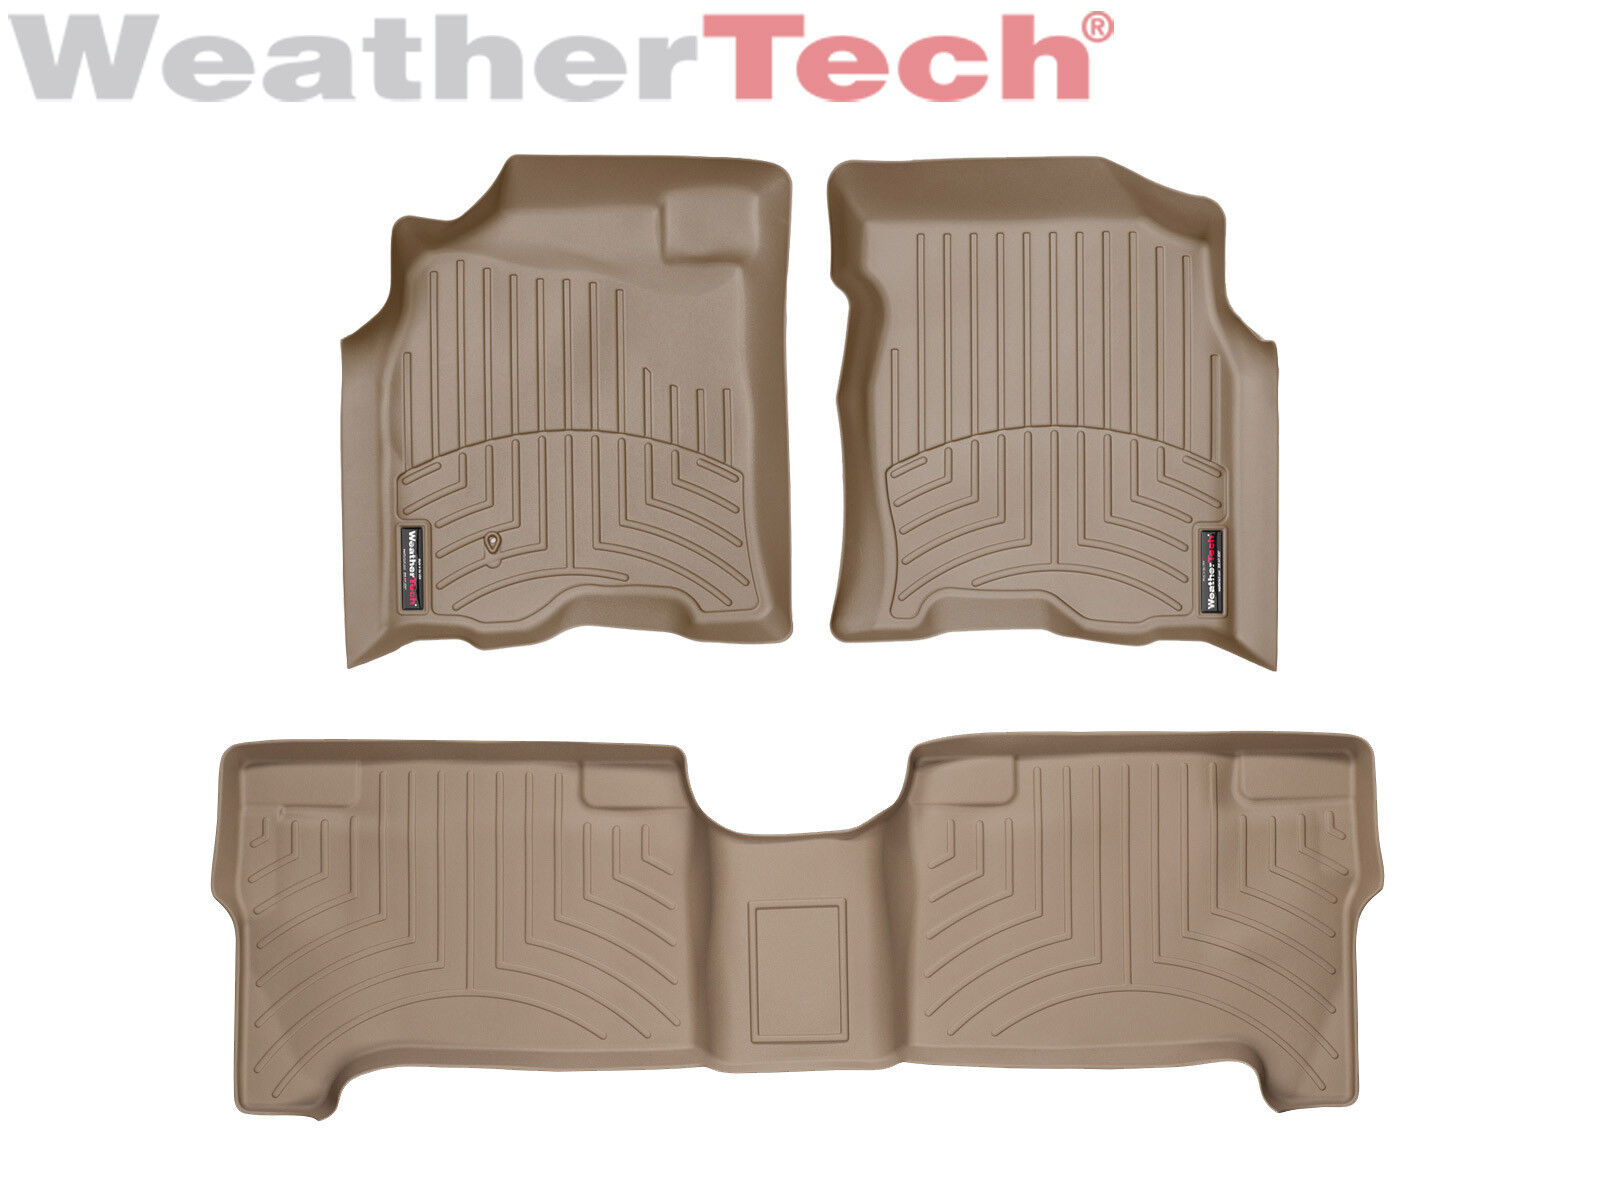 WeatherTech FloorLiner Mats for Toyota Tundra -Double Cab - 2004-2006 - Tan